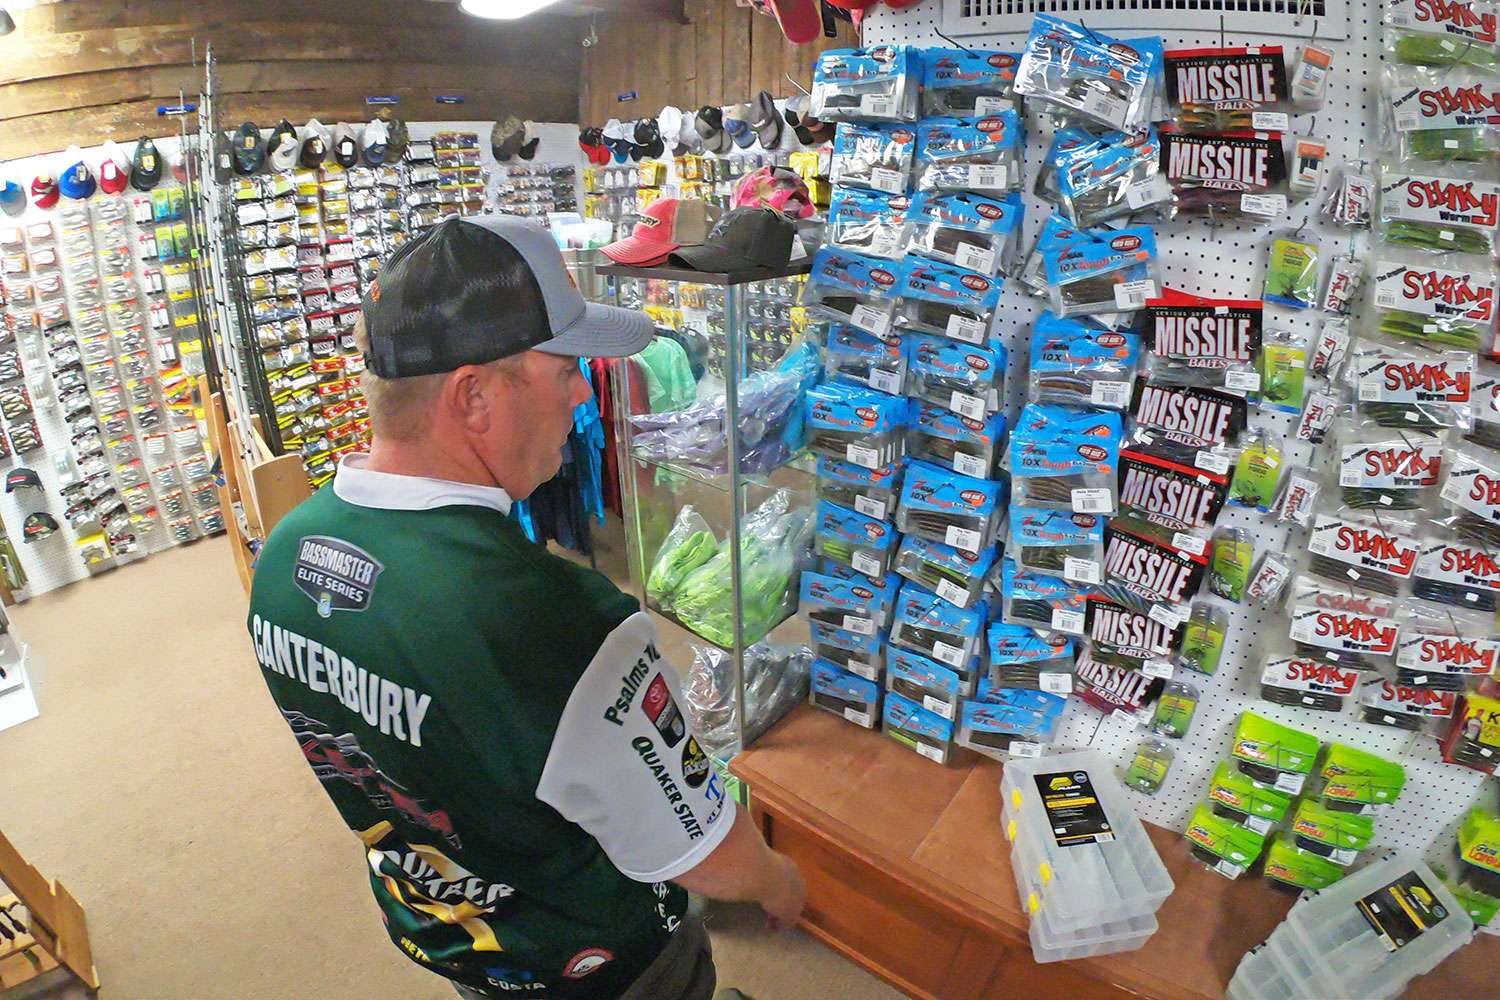 There is also a jam-packed tackle shop that offers everything a bass fanatic could need. They affectionately refer to it as The Loft. Here Scott Canterbury finds more tackle that he 